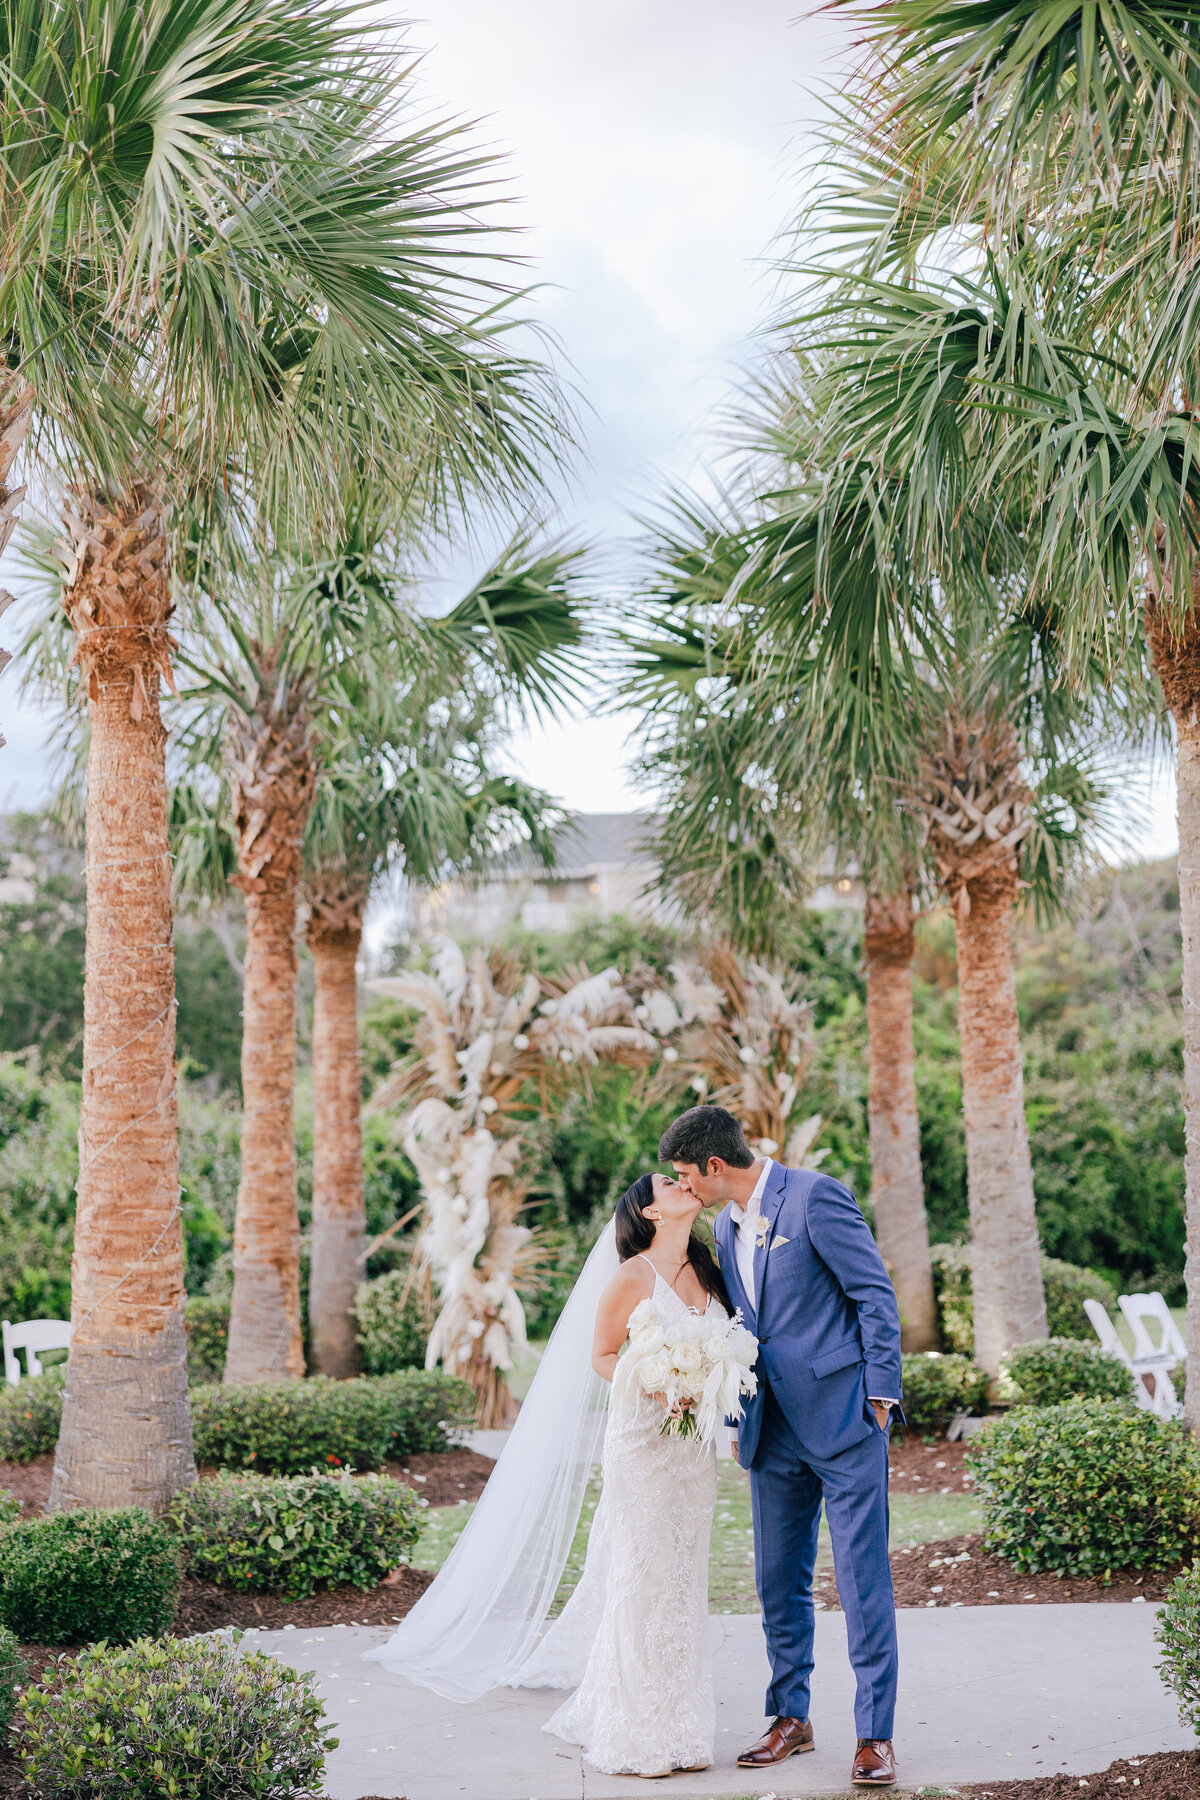 Bride and groom sharing a tender moment beneath palm trees, captured by a Destination Wedding Photographer.